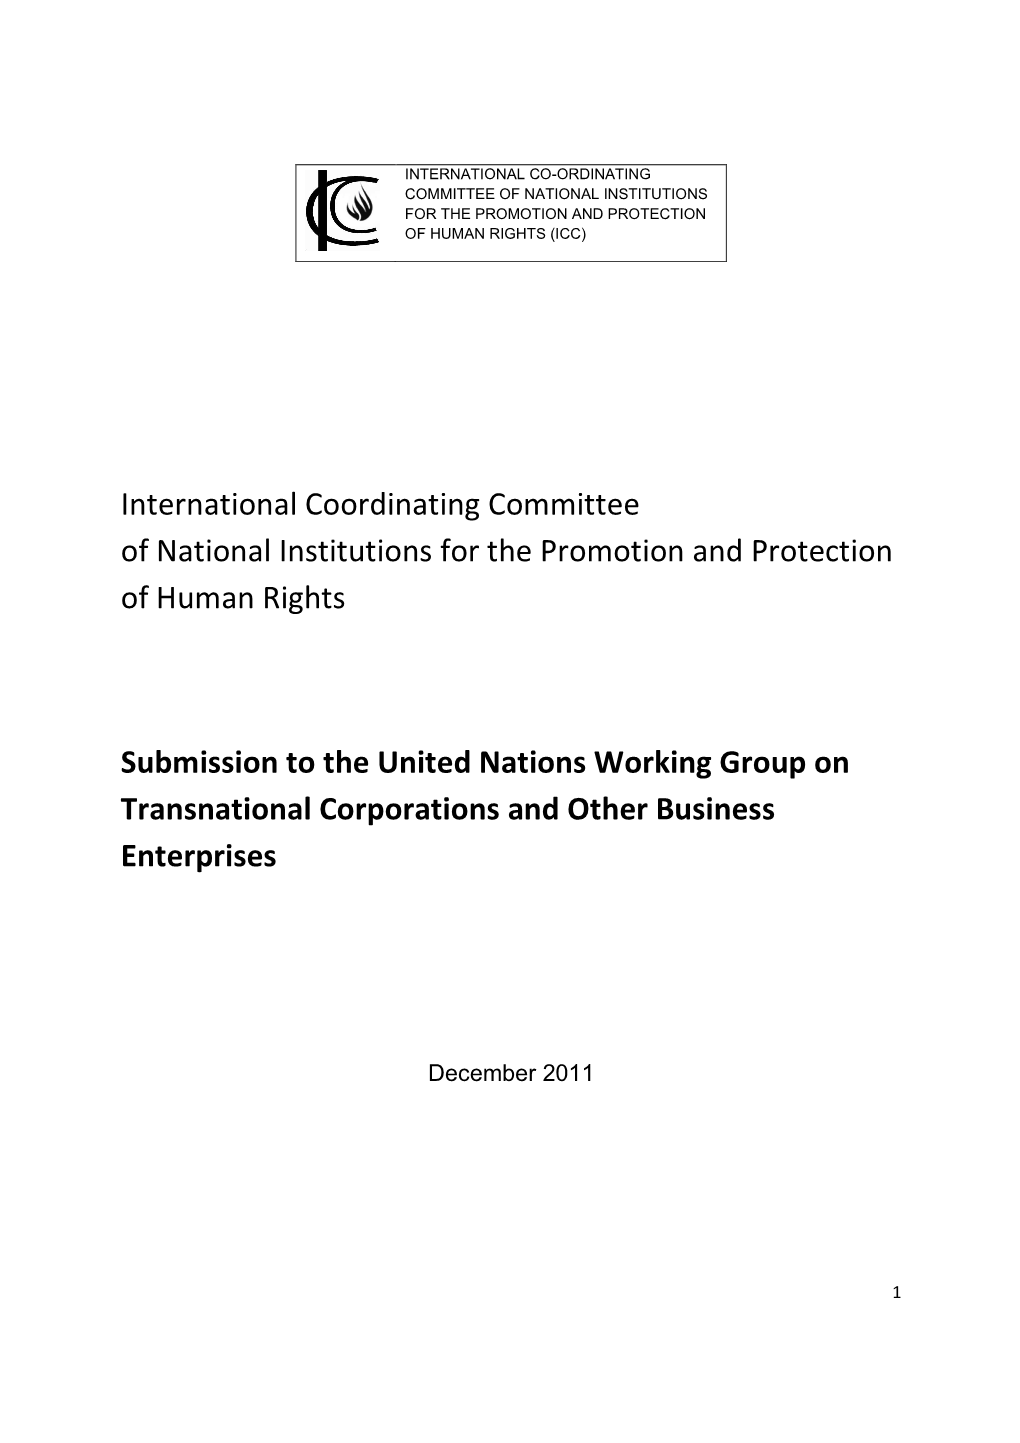 International Coordinating Committee of National Institutions for the Promotion and Protection of Human Rights